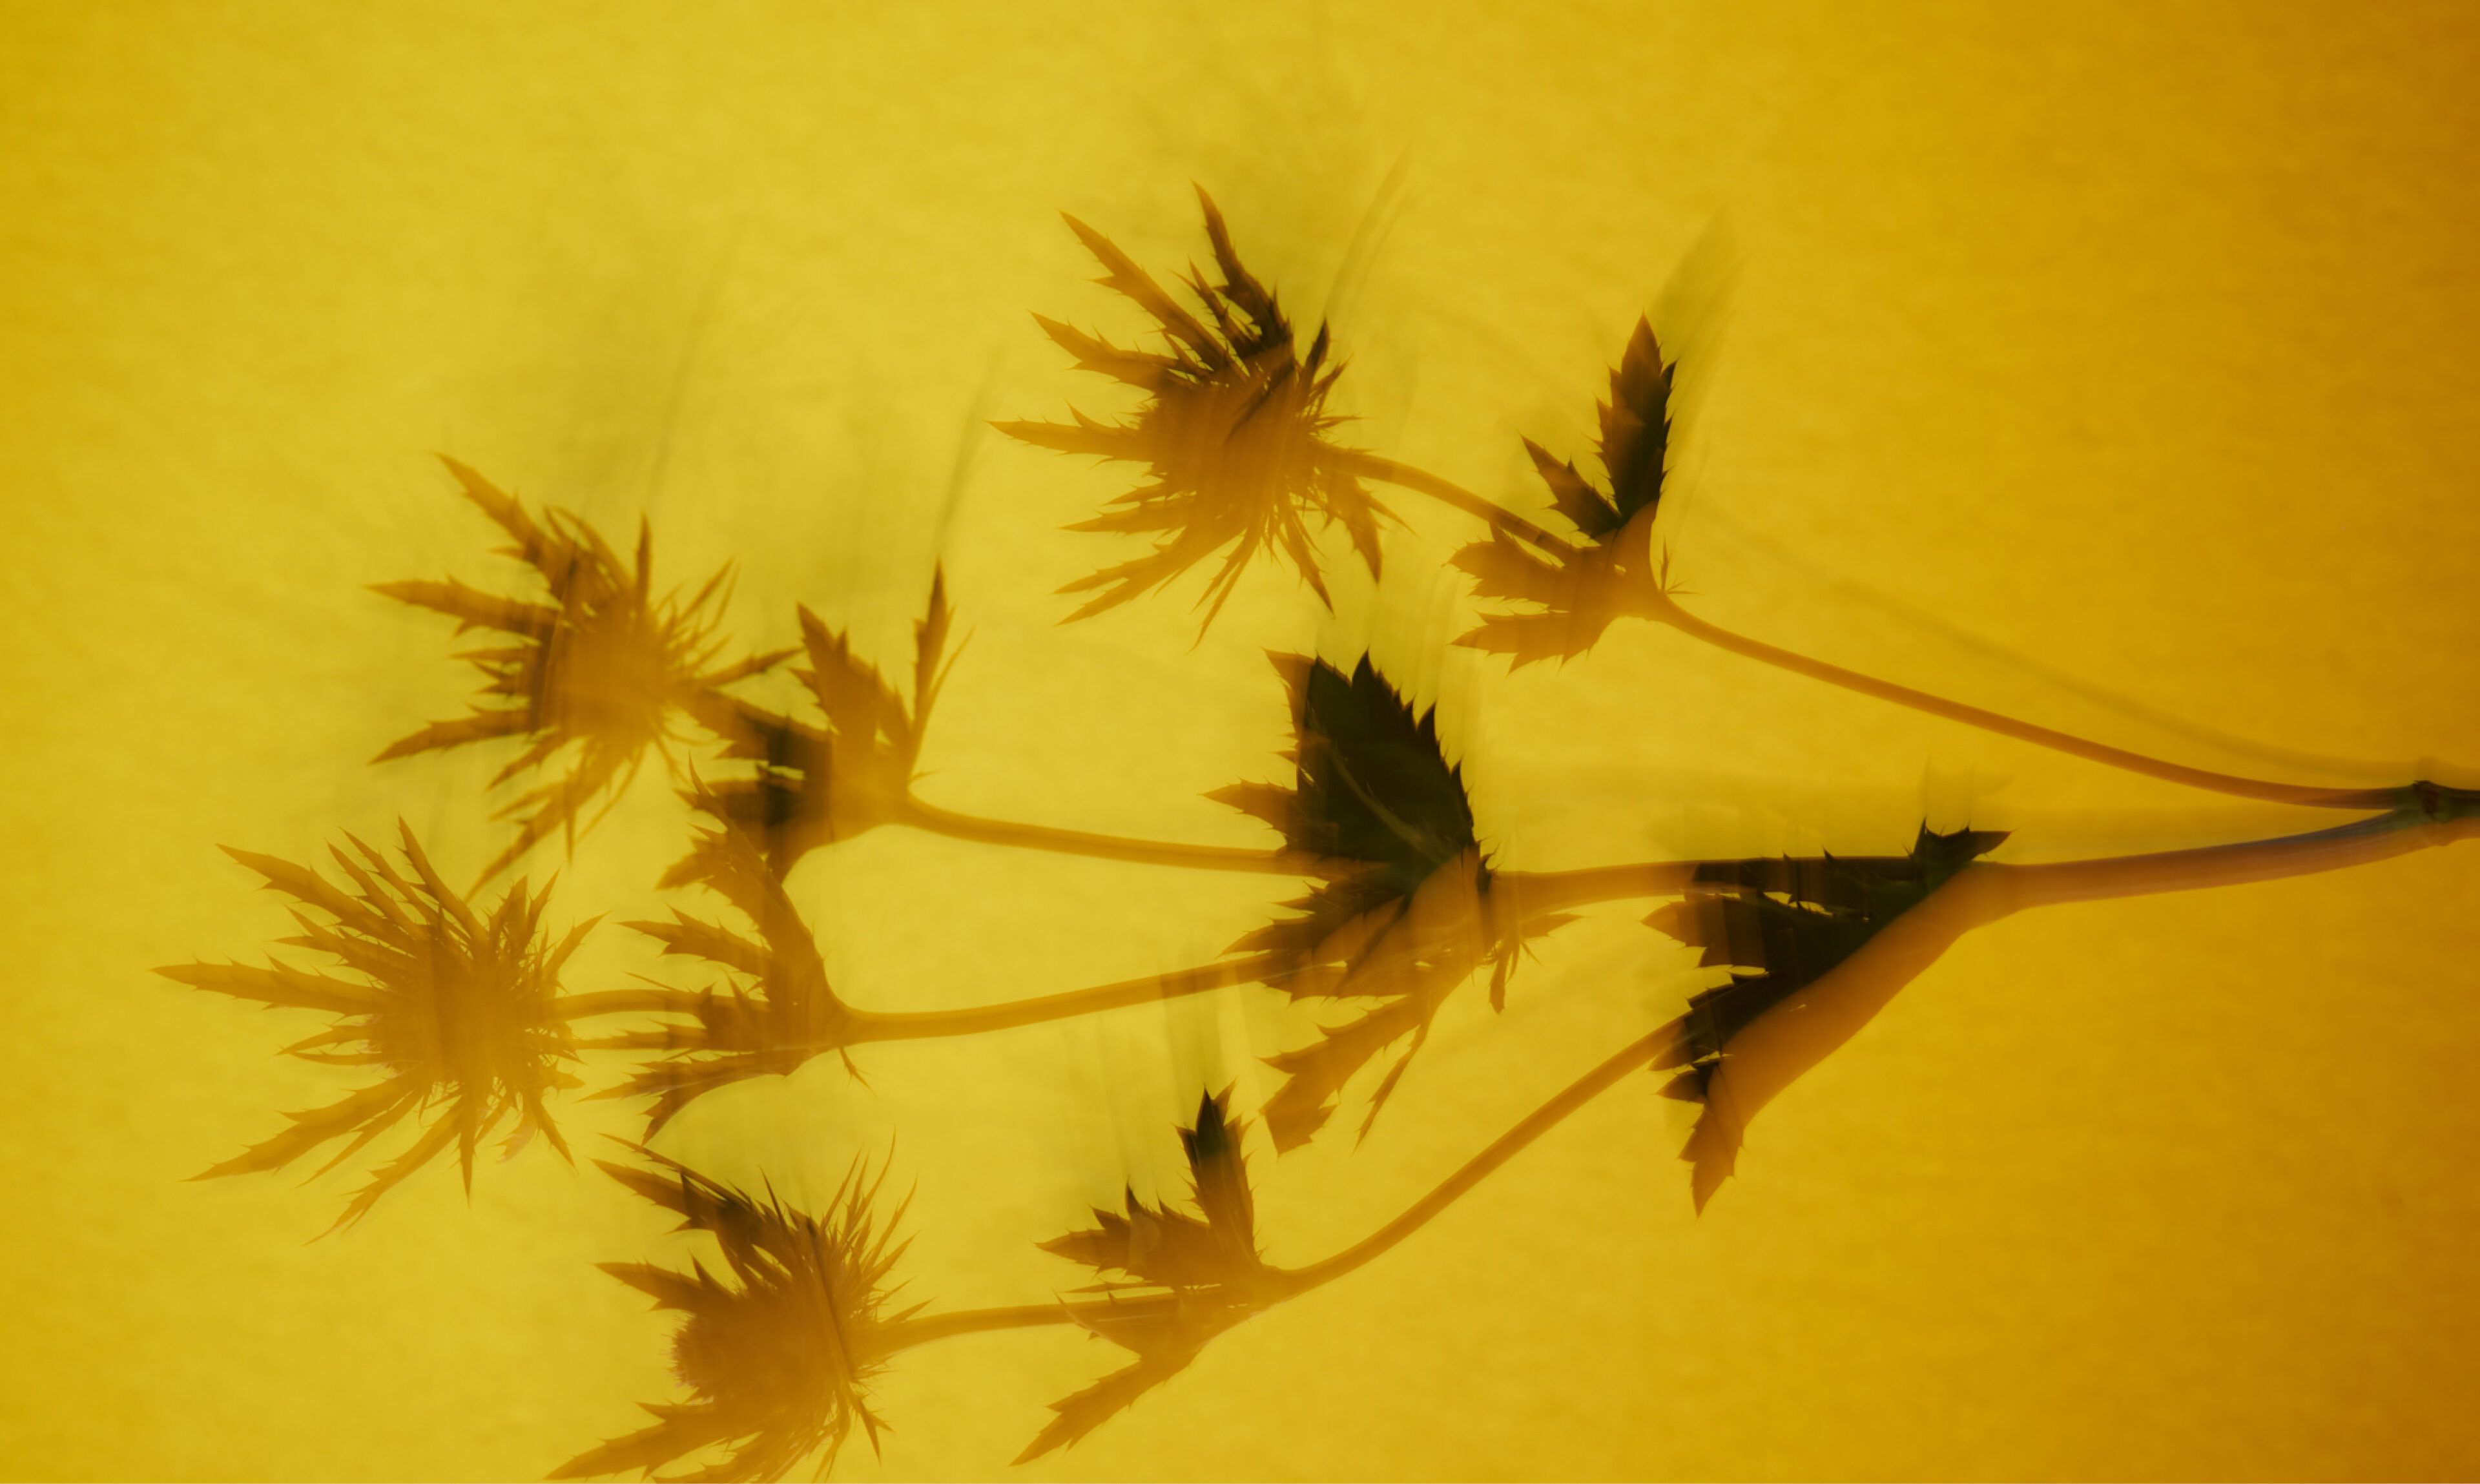 Silhouettes of thorny spiky leaved plants on a yellow background